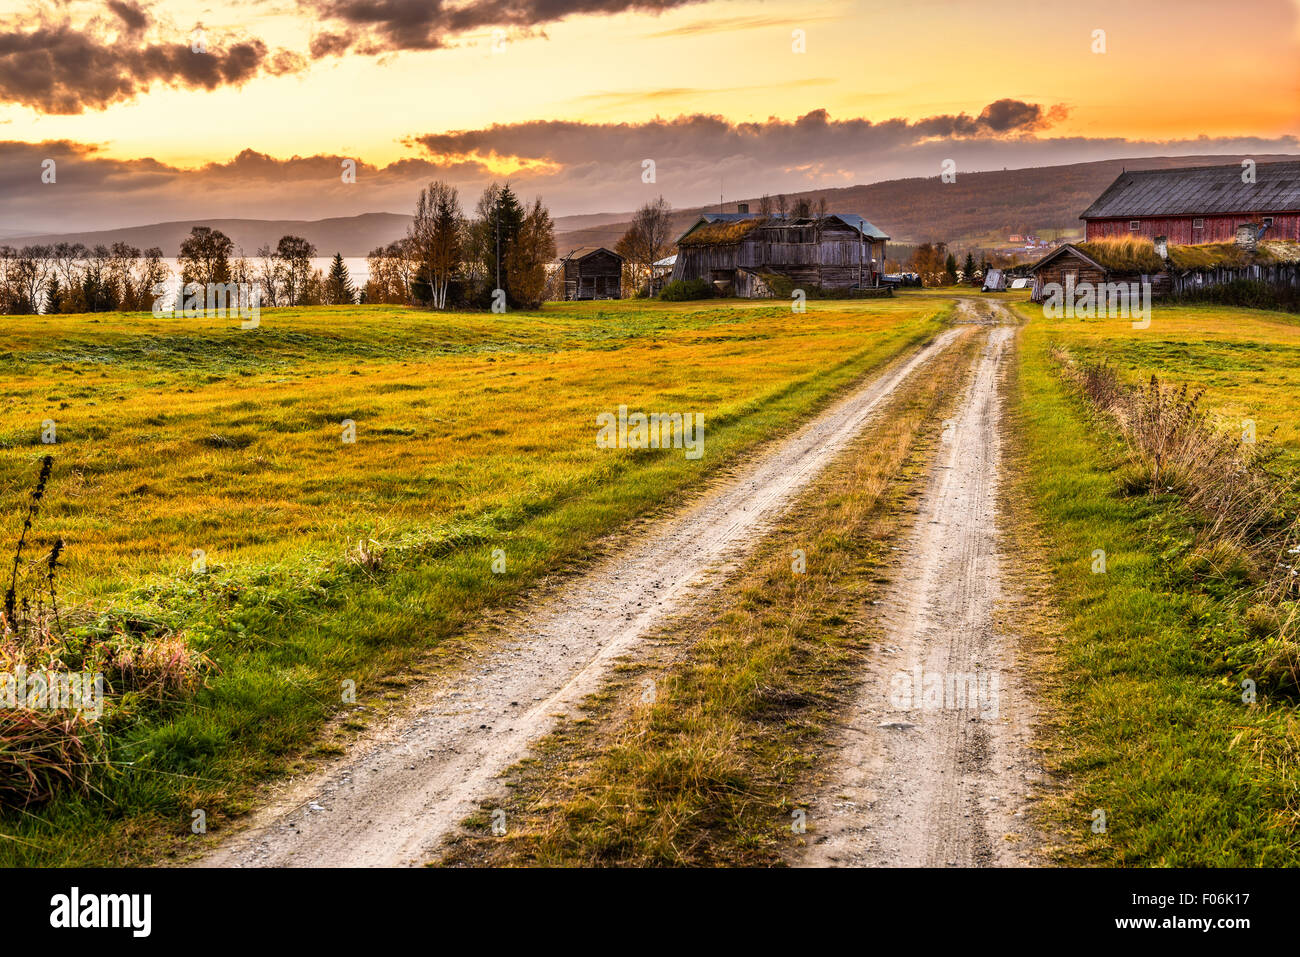 Iconic wooden barn with farmhouse and rural path at sunset in Norway Stock Photo